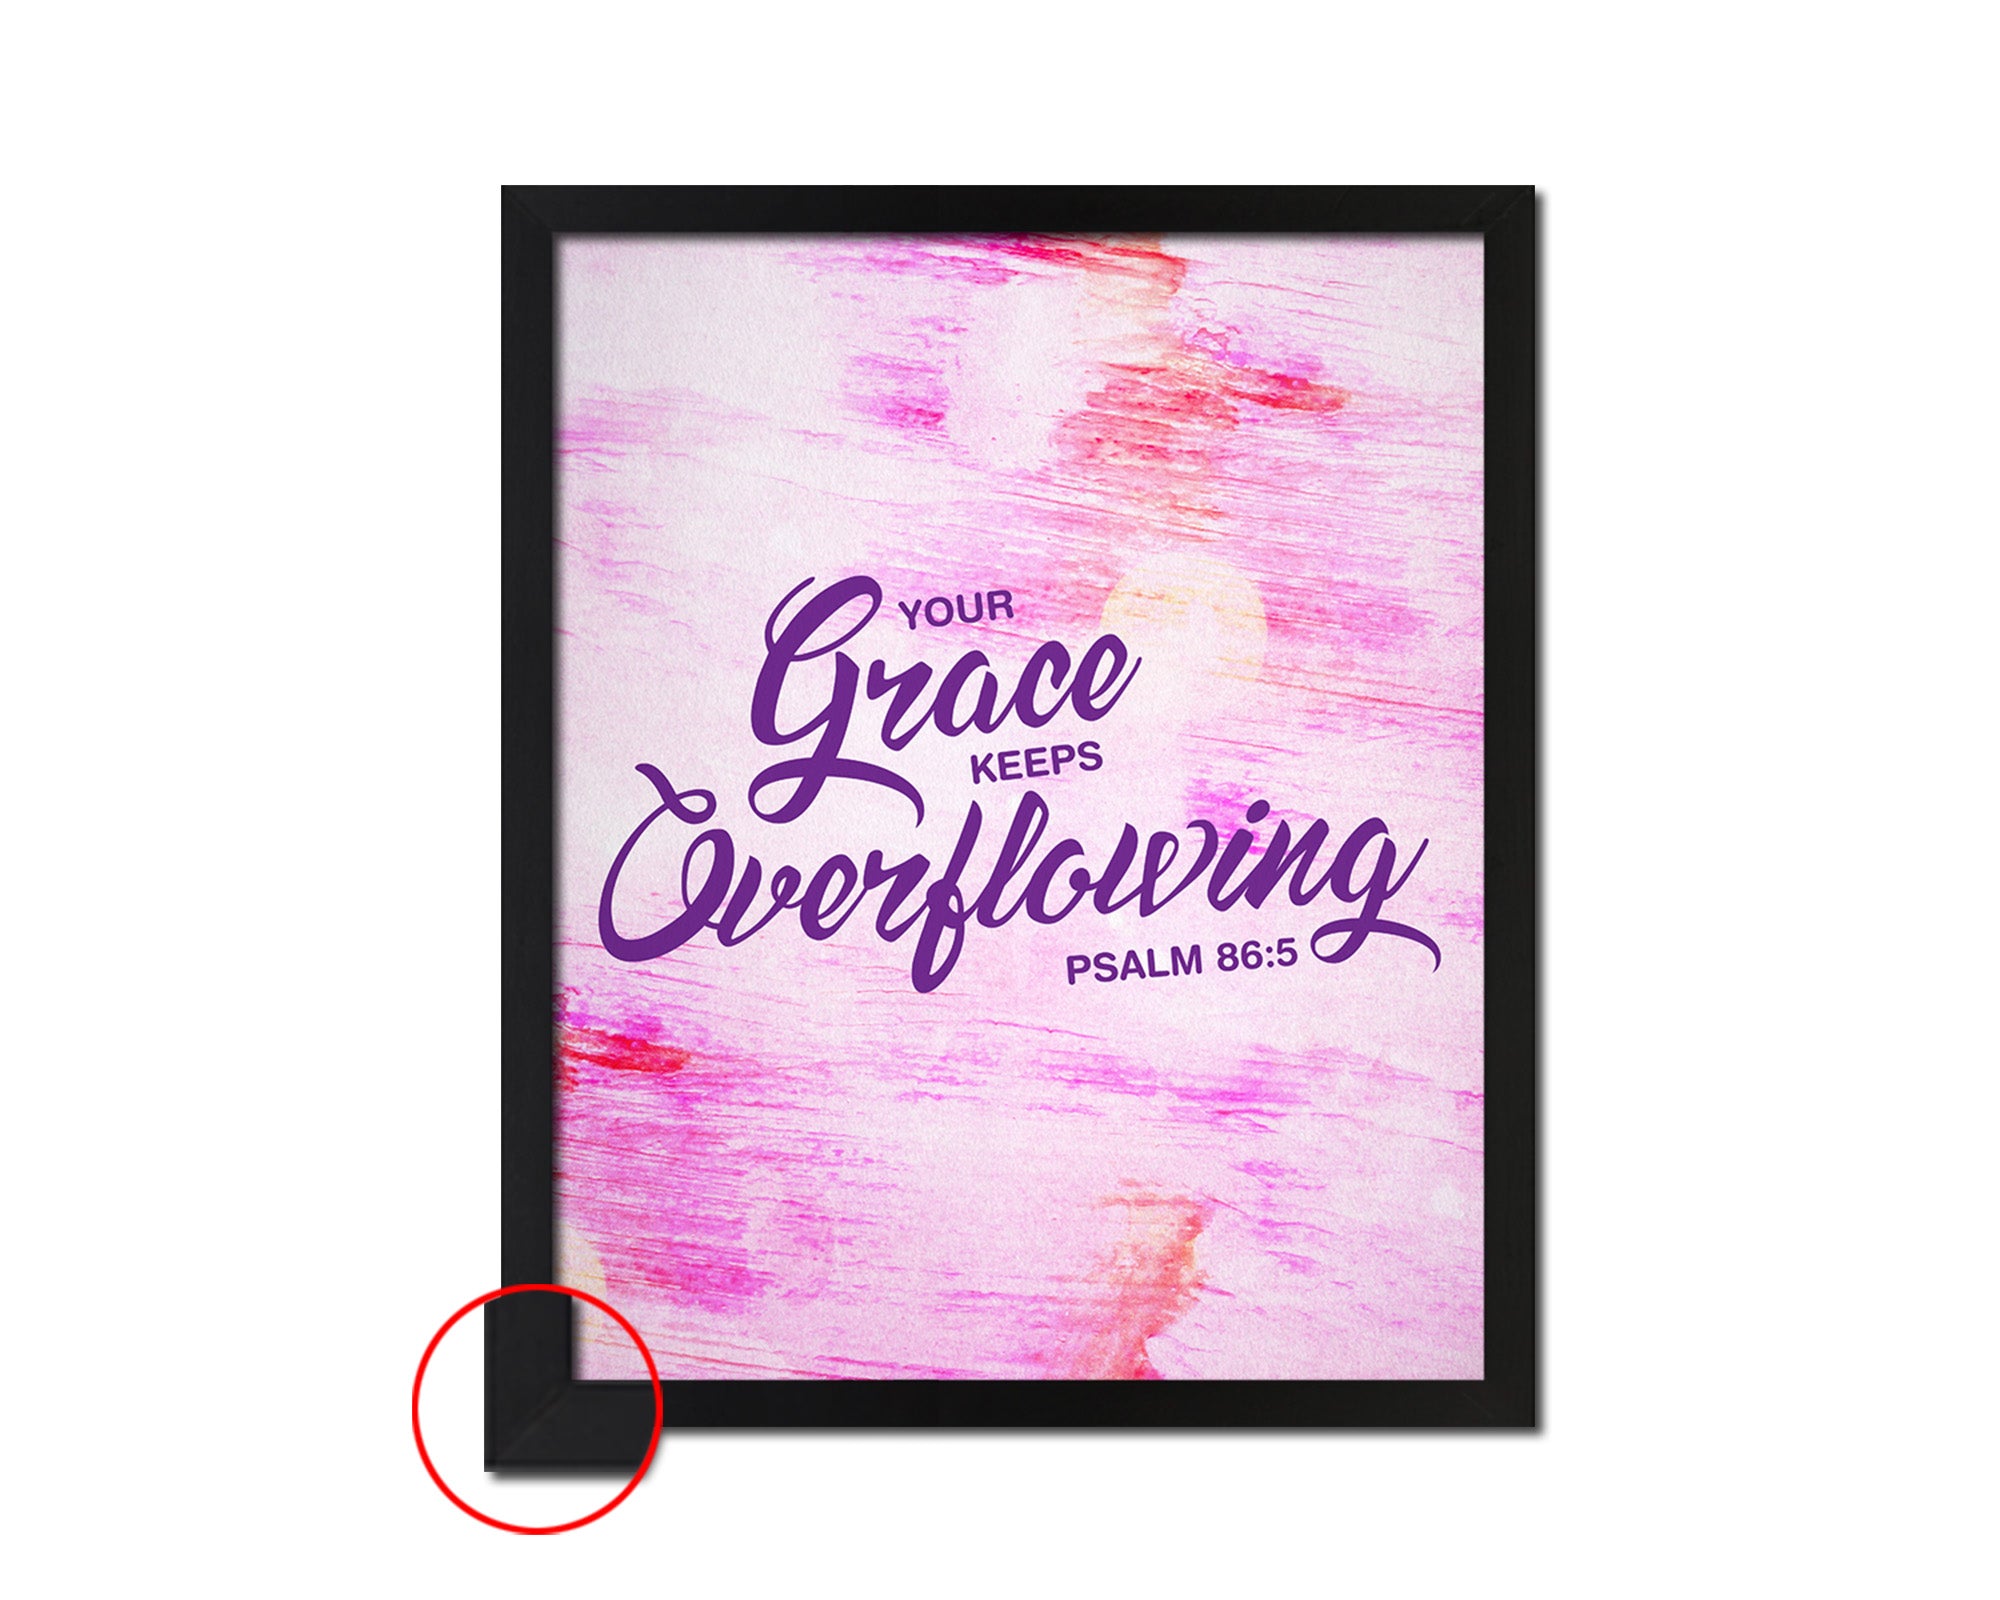 Your grace keeps overflowing, Psalm 86:5 Bible Verse Scripture Framed Print Wall Decor Art Gifts